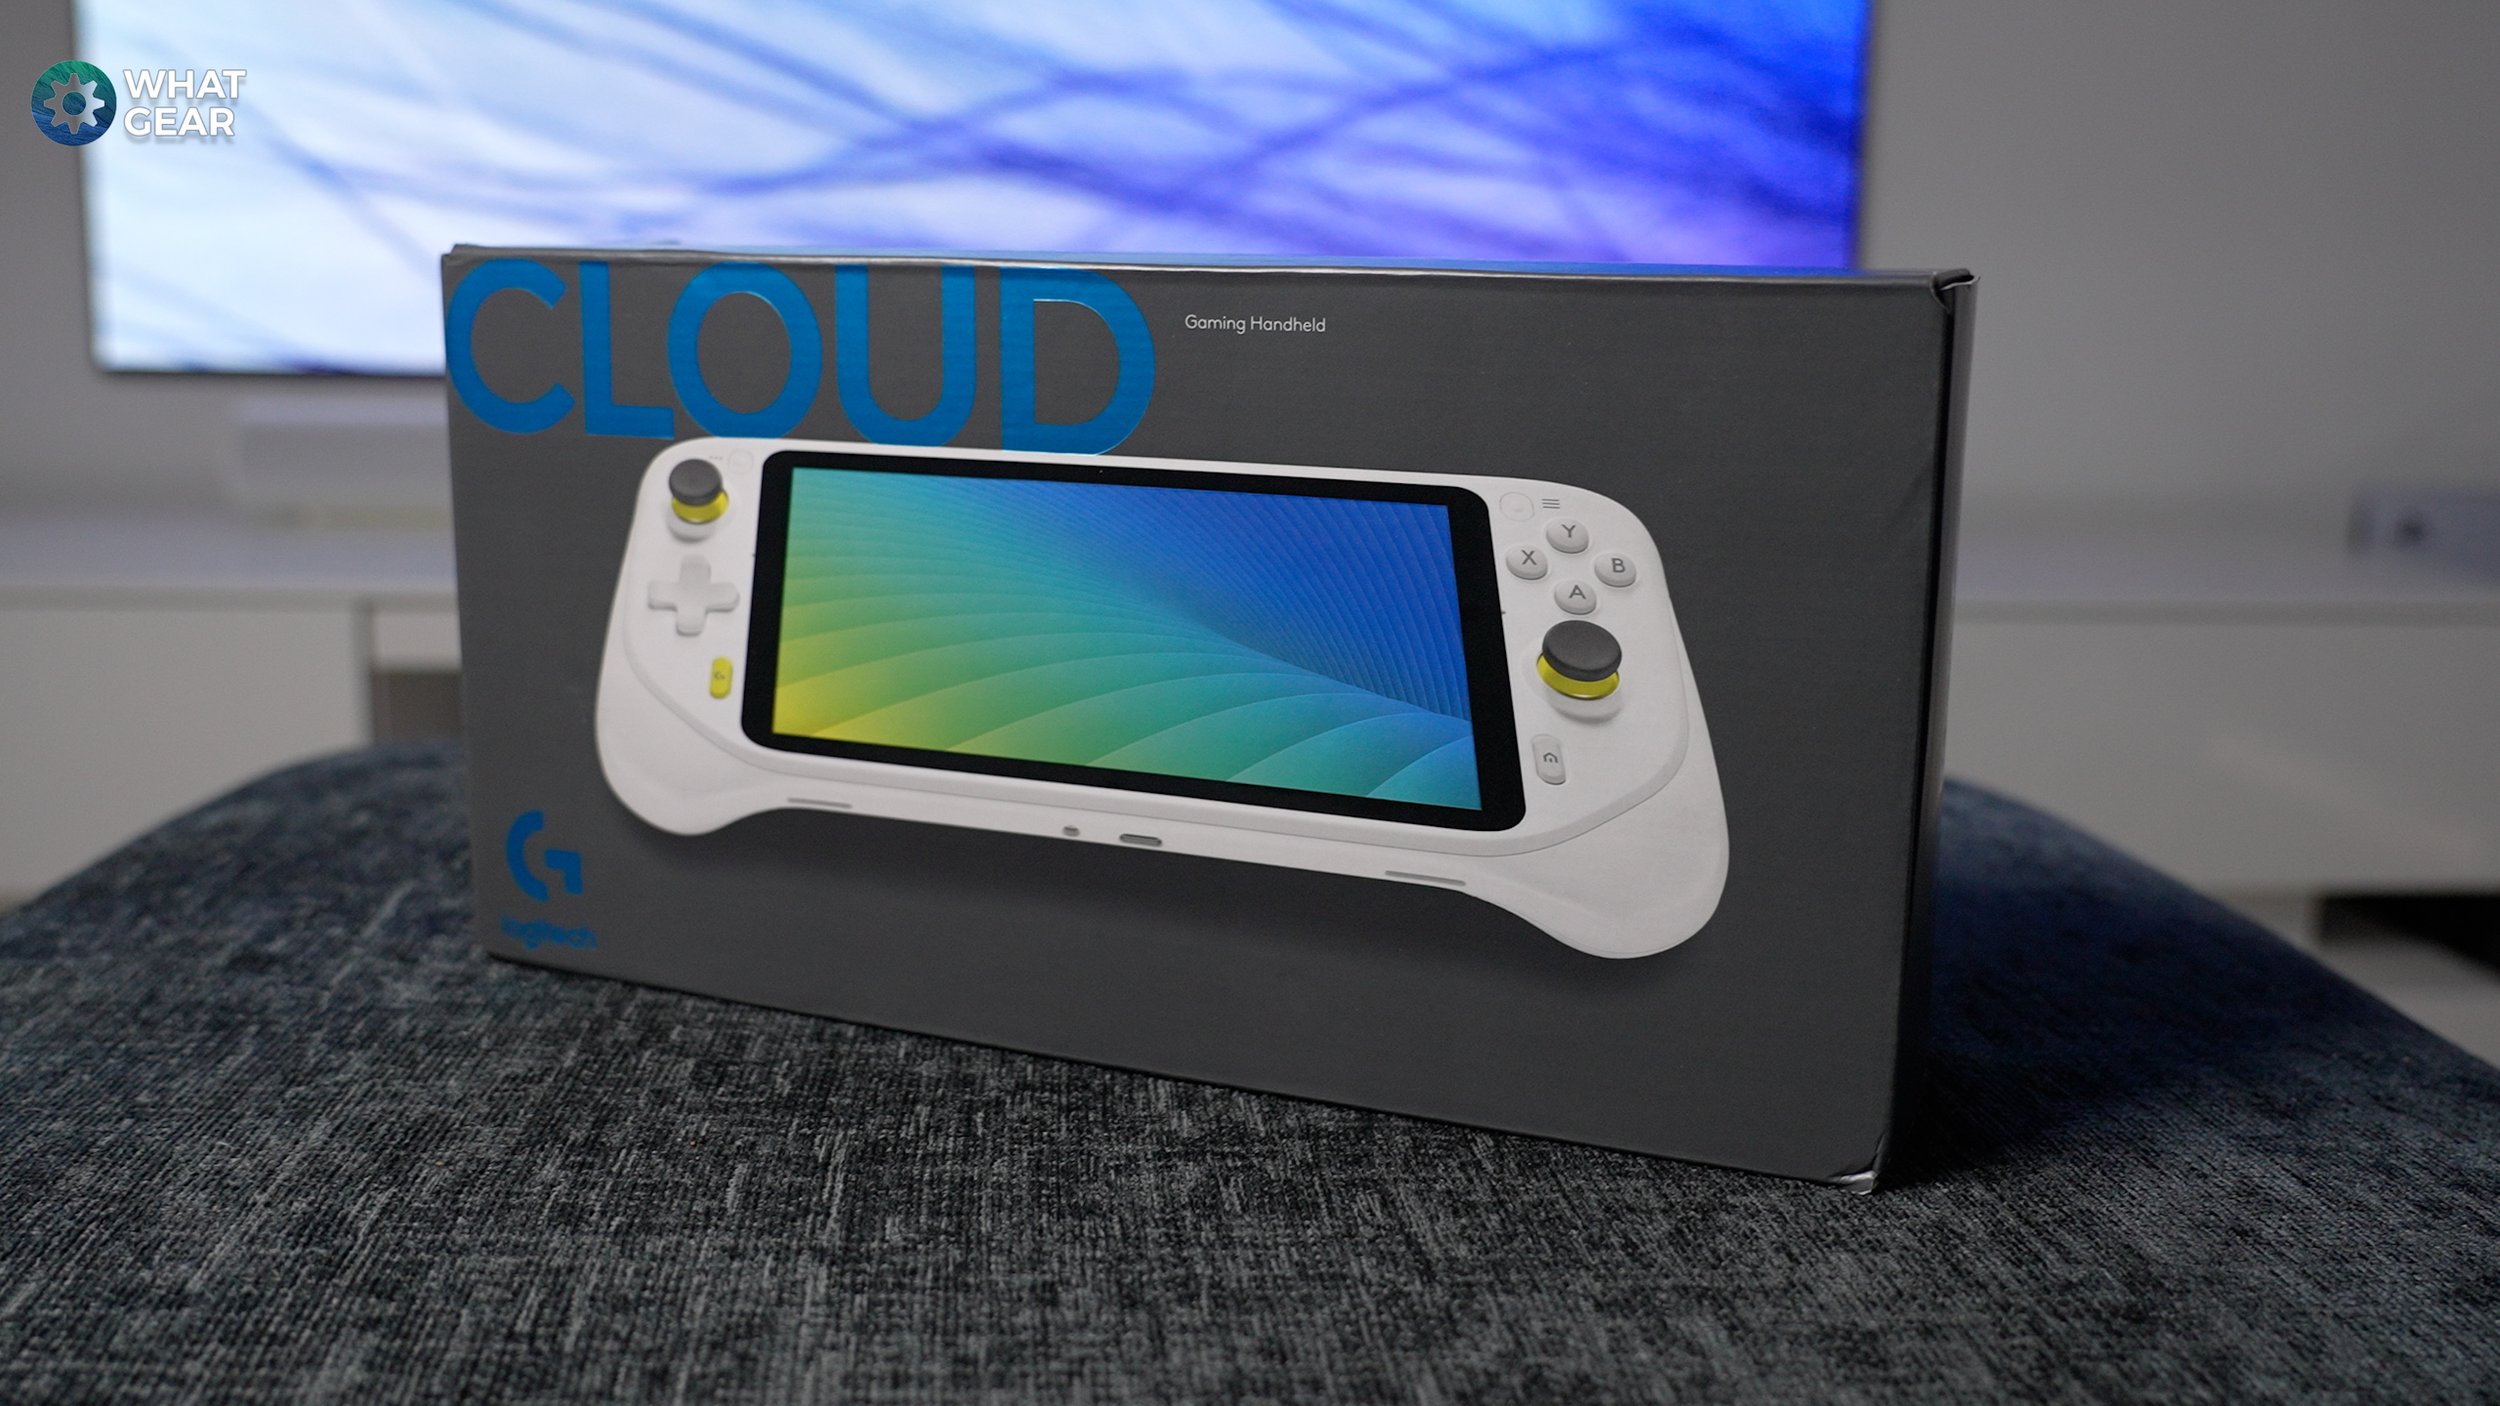 The Logitech G Cloud Gaming Handheld is the closest thing we'll